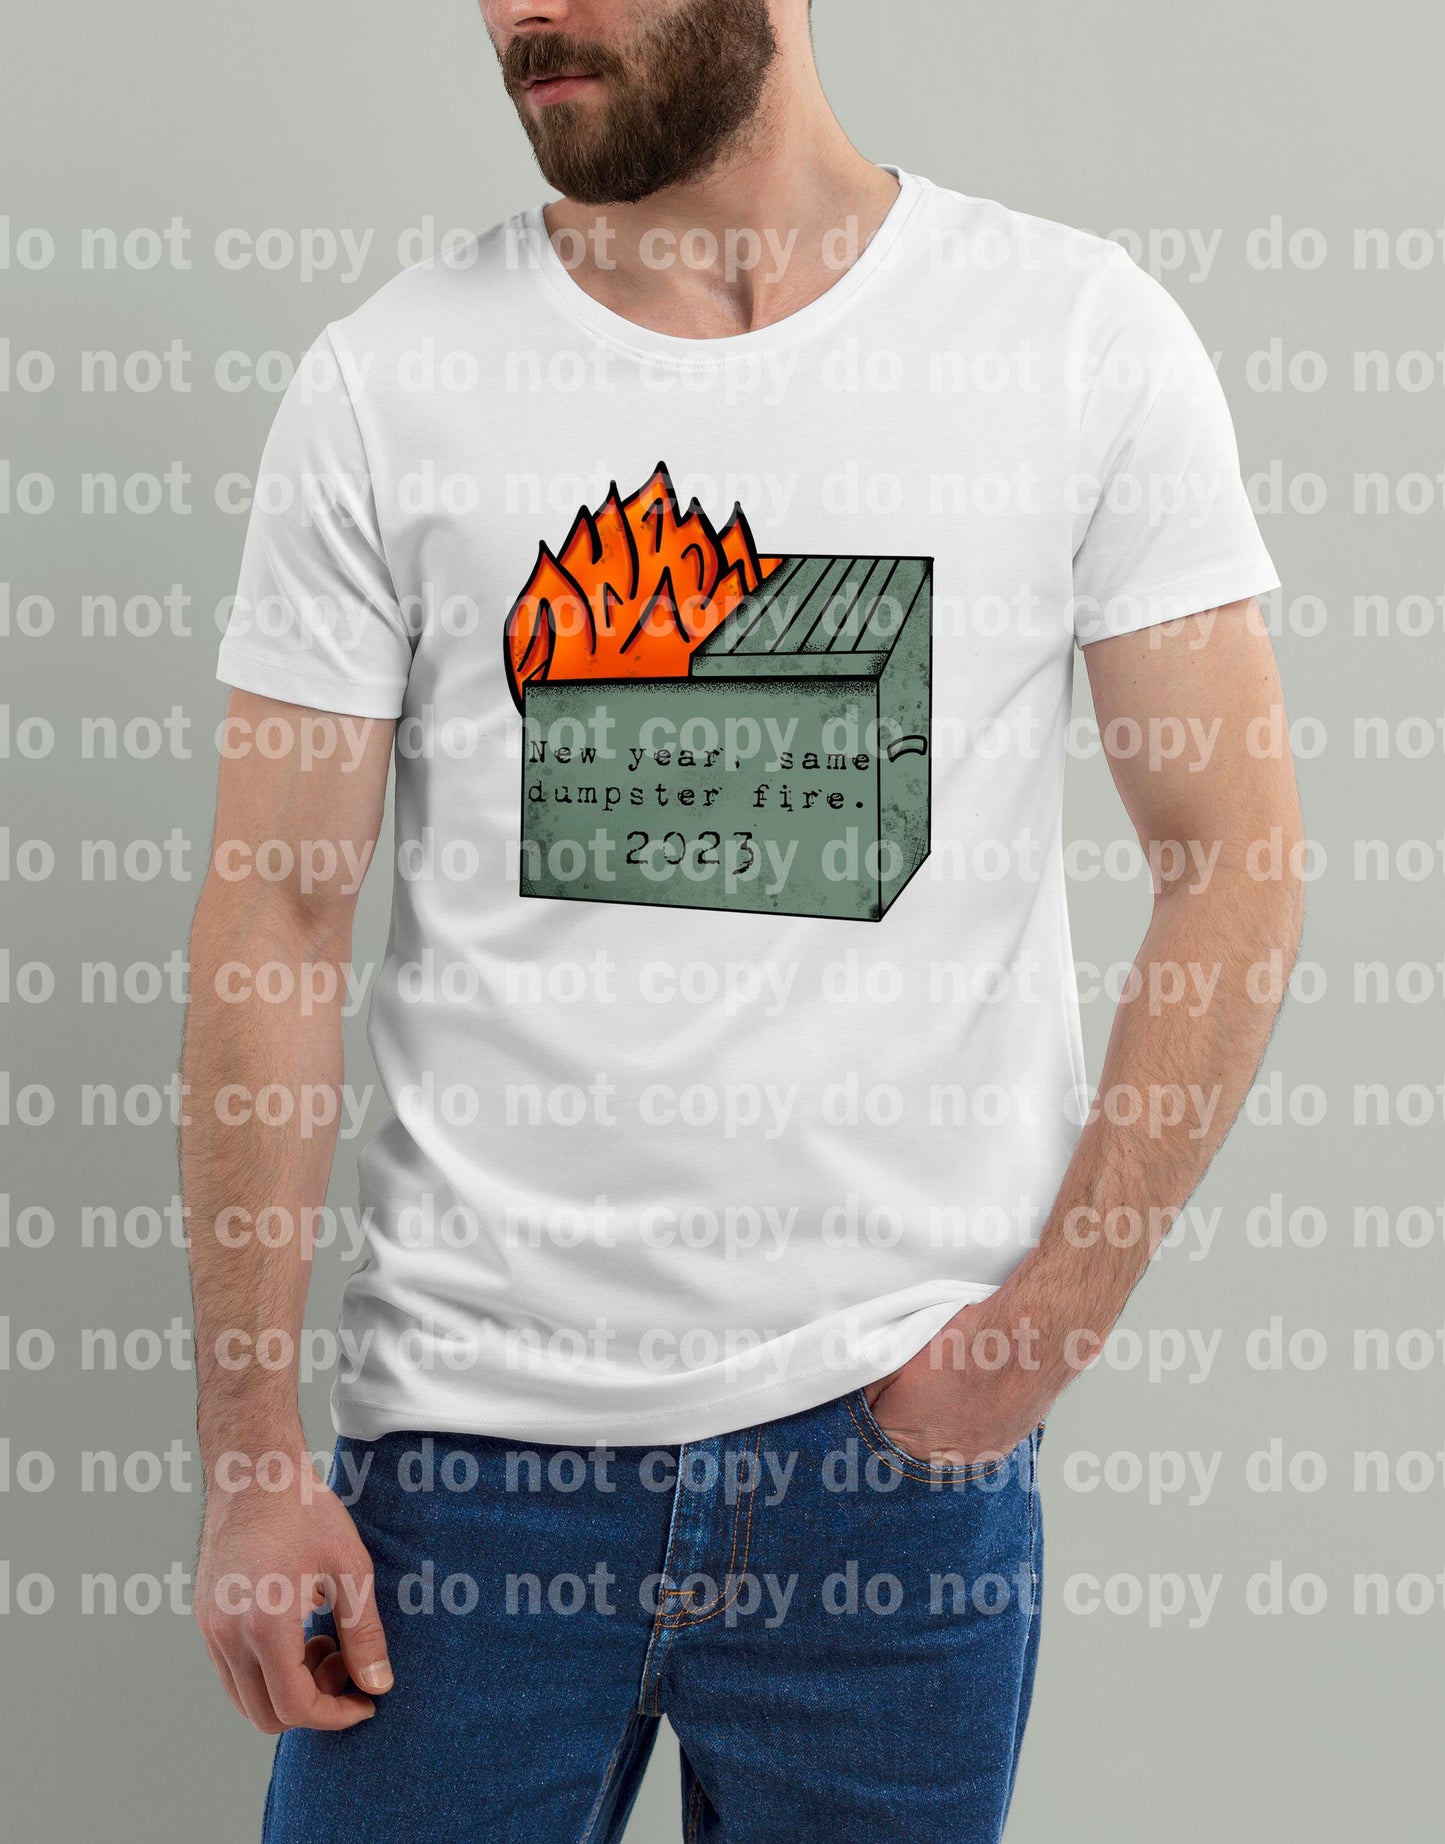 New Year Same Dumpster Fire 2023 Dream Print or Sublimation Print